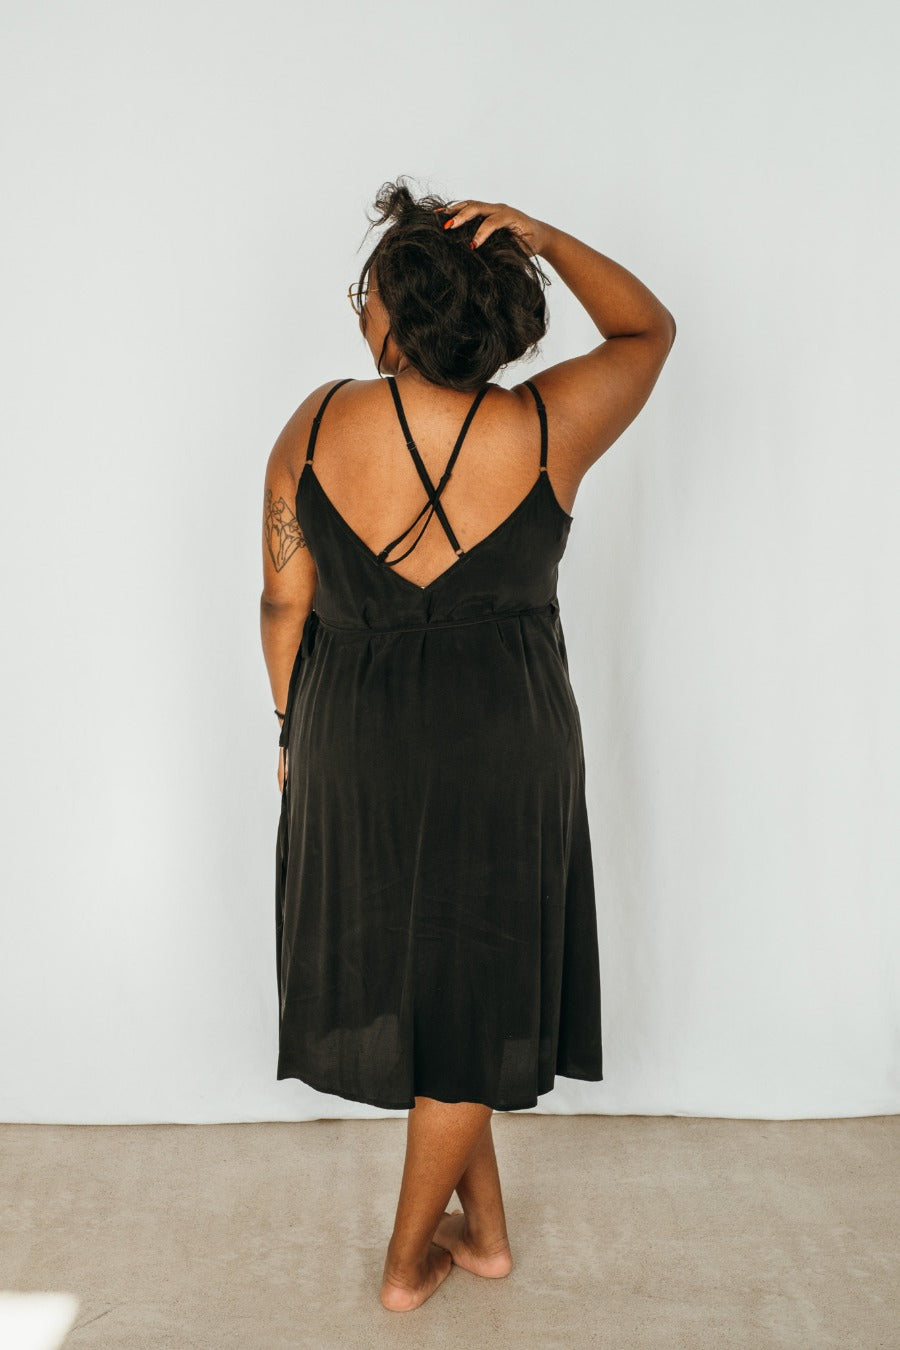 Plus size model wears black negligee from thoose, the label from Lucerne.